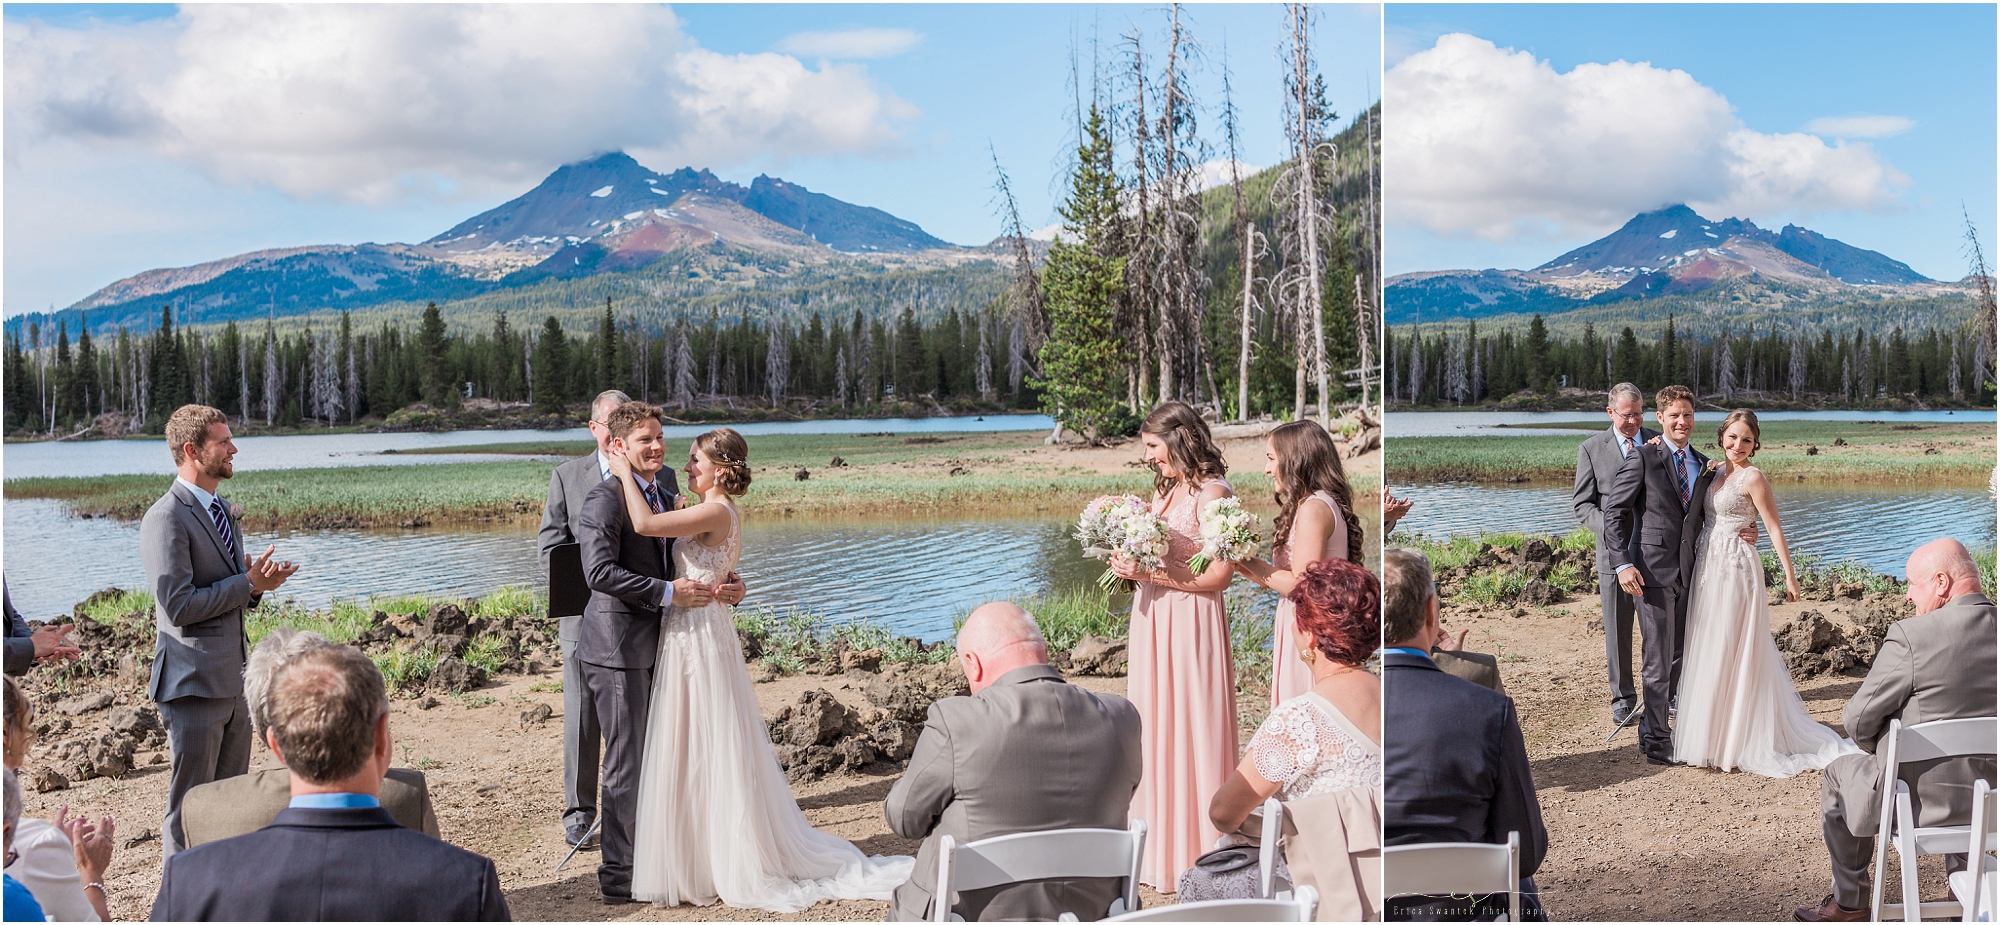 Amazing mountain wedding in the Cascades near Bend, OR. 